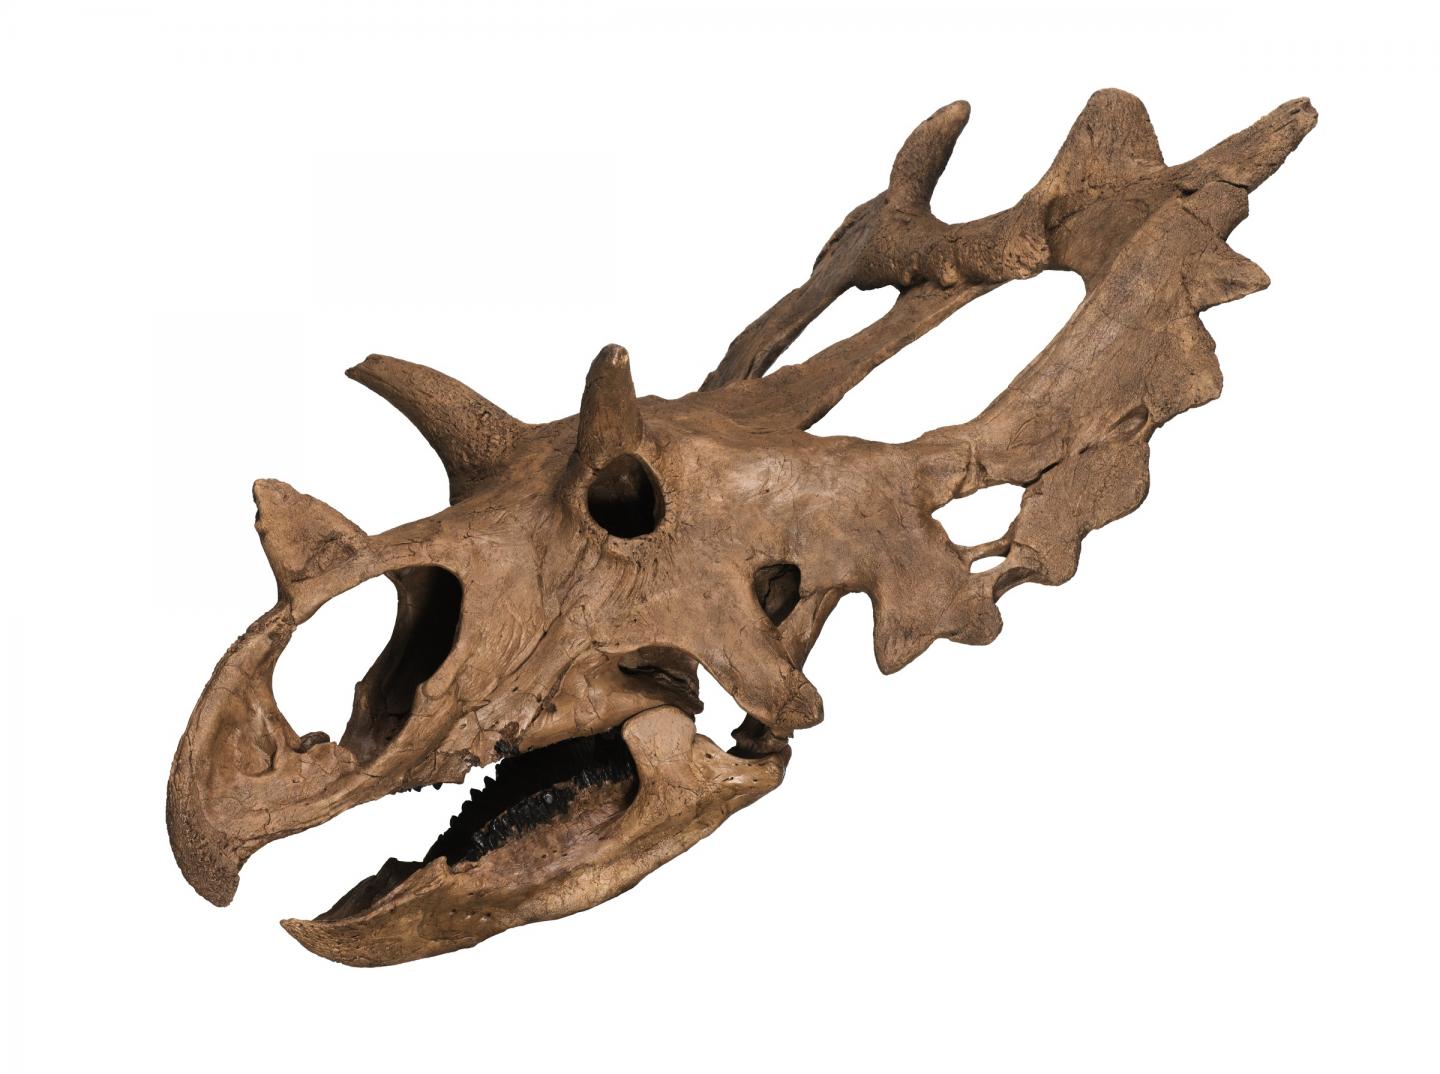 New Species of Horned Dinosaur with a Spiked 'Shield' (2/3)